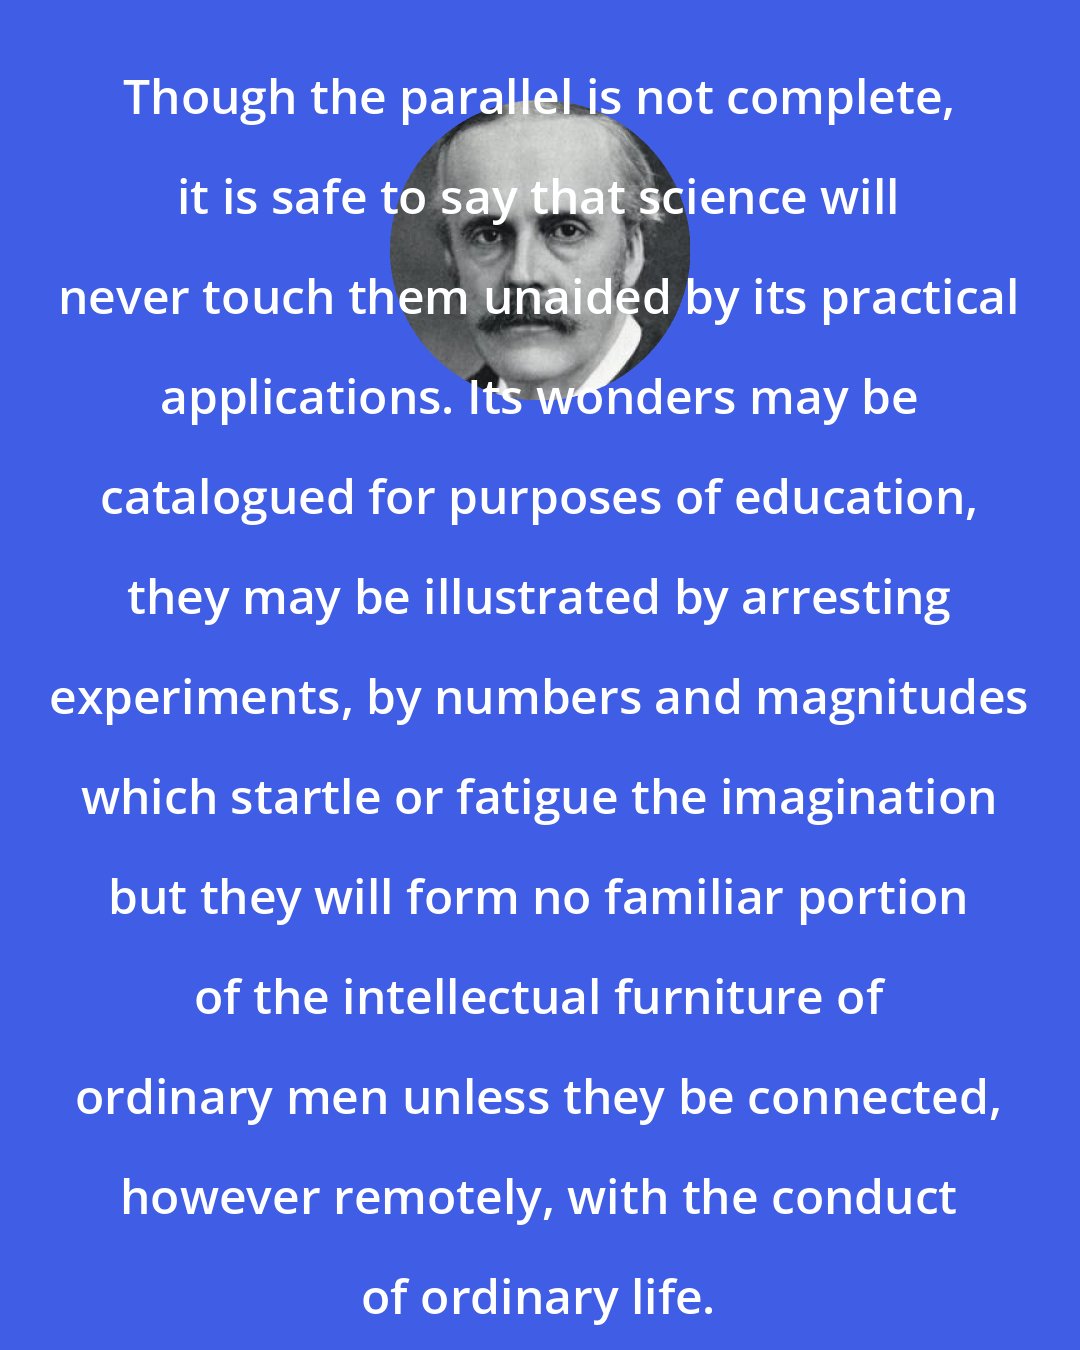 Arthur Balfour: Though the parallel is not complete, it is safe to say that science will never touch them unaided by its practical applications. Its wonders may be catalogued for purposes of education, they may be illustrated by arresting experiments, by numbers and magnitudes which startle or fatigue the imagination but they will form no familiar portion of the intellectual furniture of ordinary men unless they be connected, however remotely, with the conduct of ordinary life.